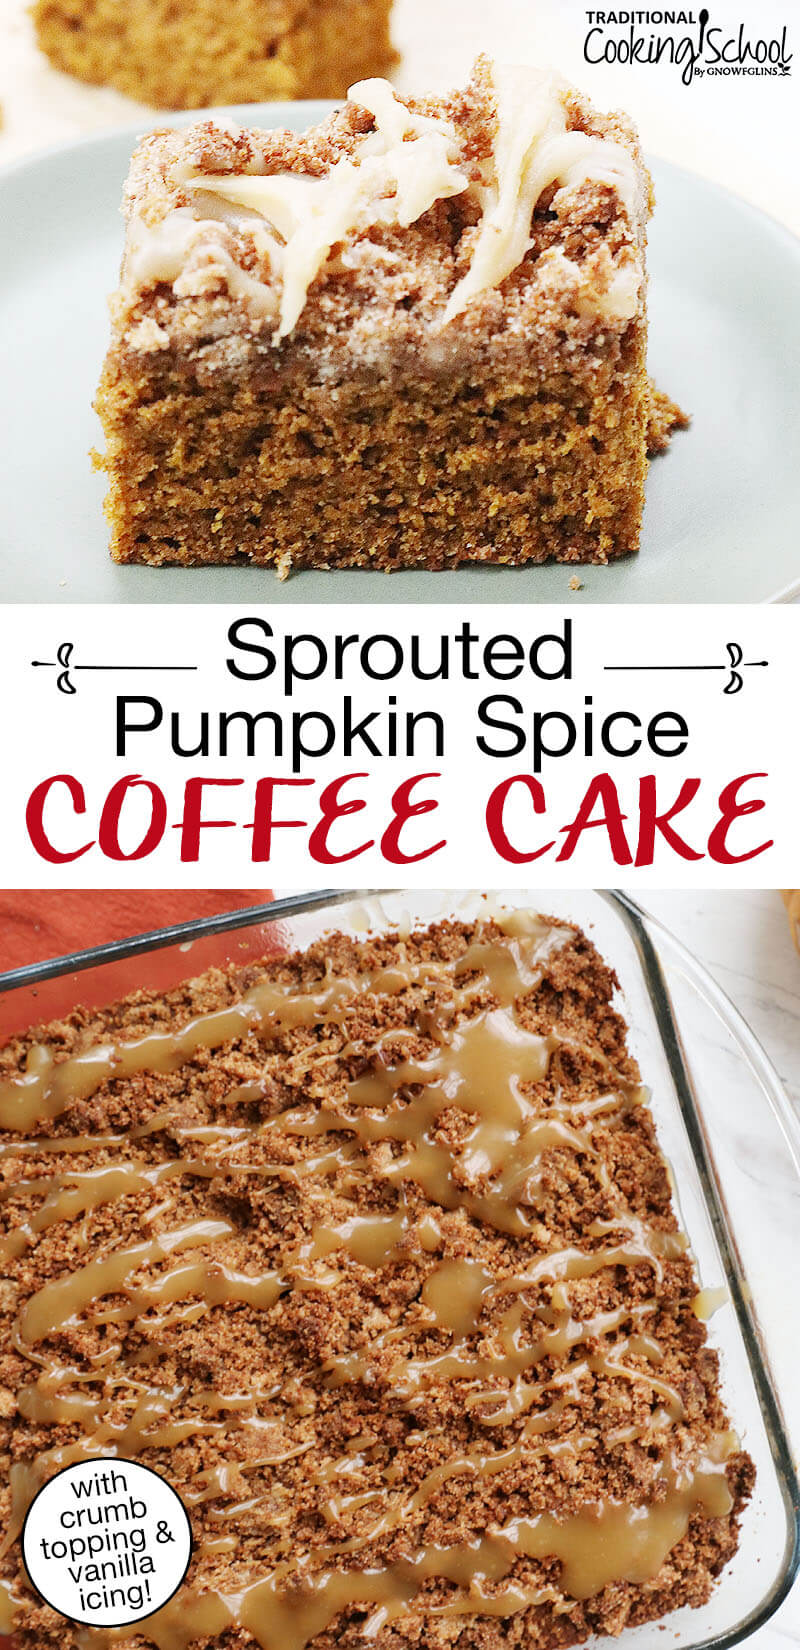 Photo collage of coffee cake with a caramel-colored drizzle. Text overlay says: "Sprouted Pumpkin Spice Coffee Cake (with crumb topping & vanilla icing!)"